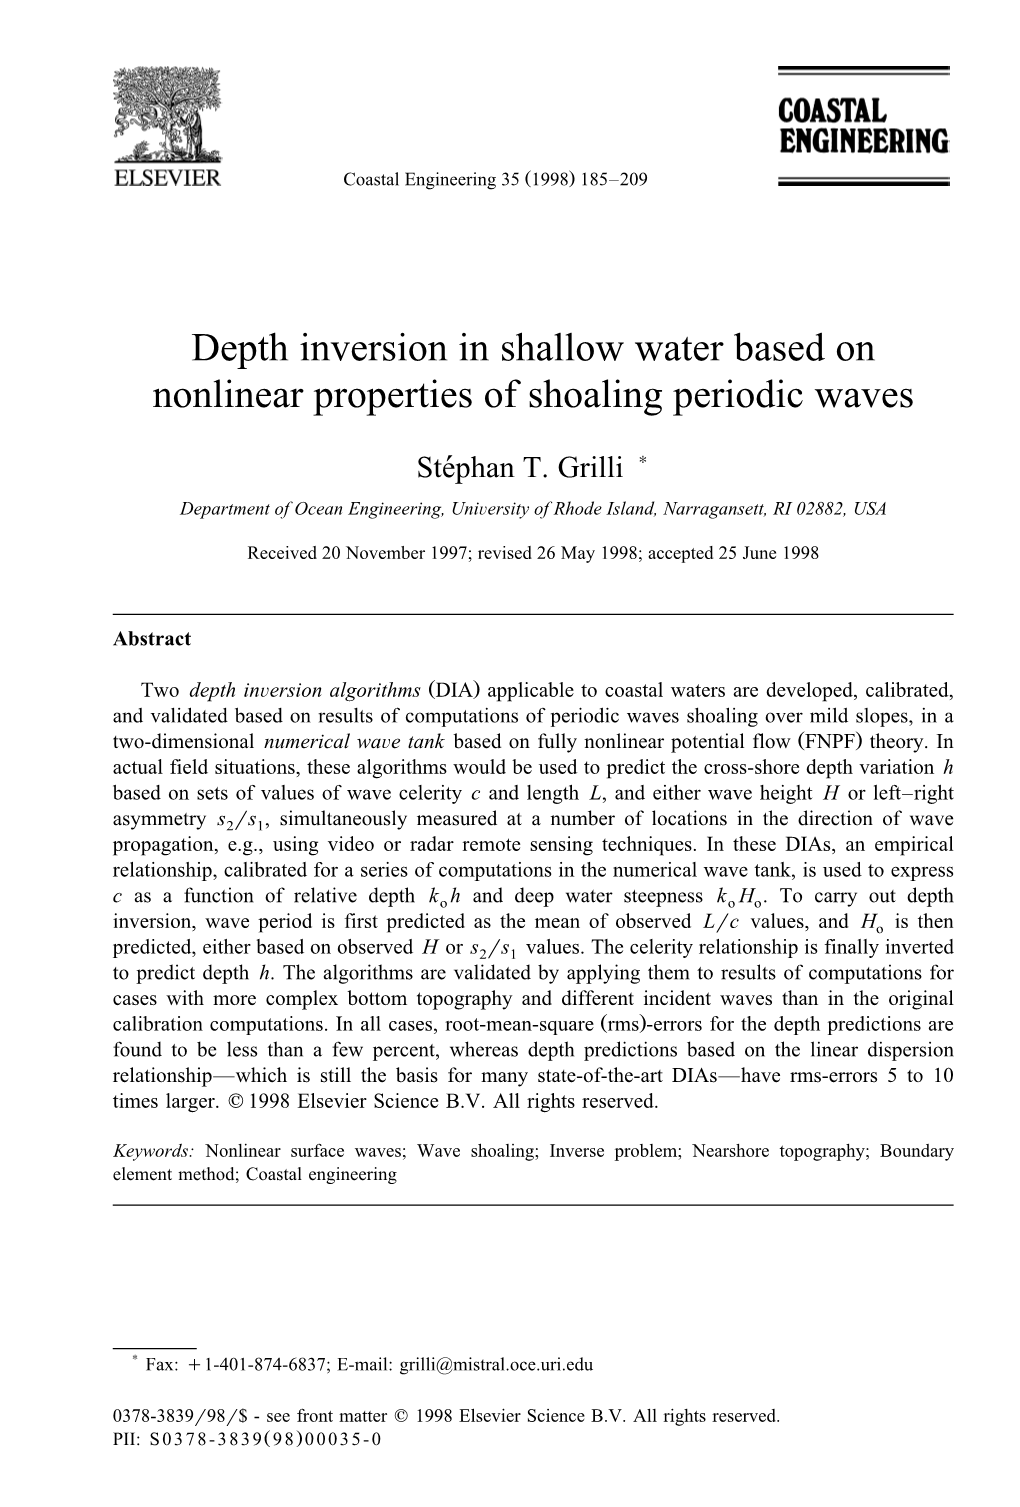 Depth Inversion in Shallow Water Based on Nonlinear Properties of Shoaling Periodic Waves